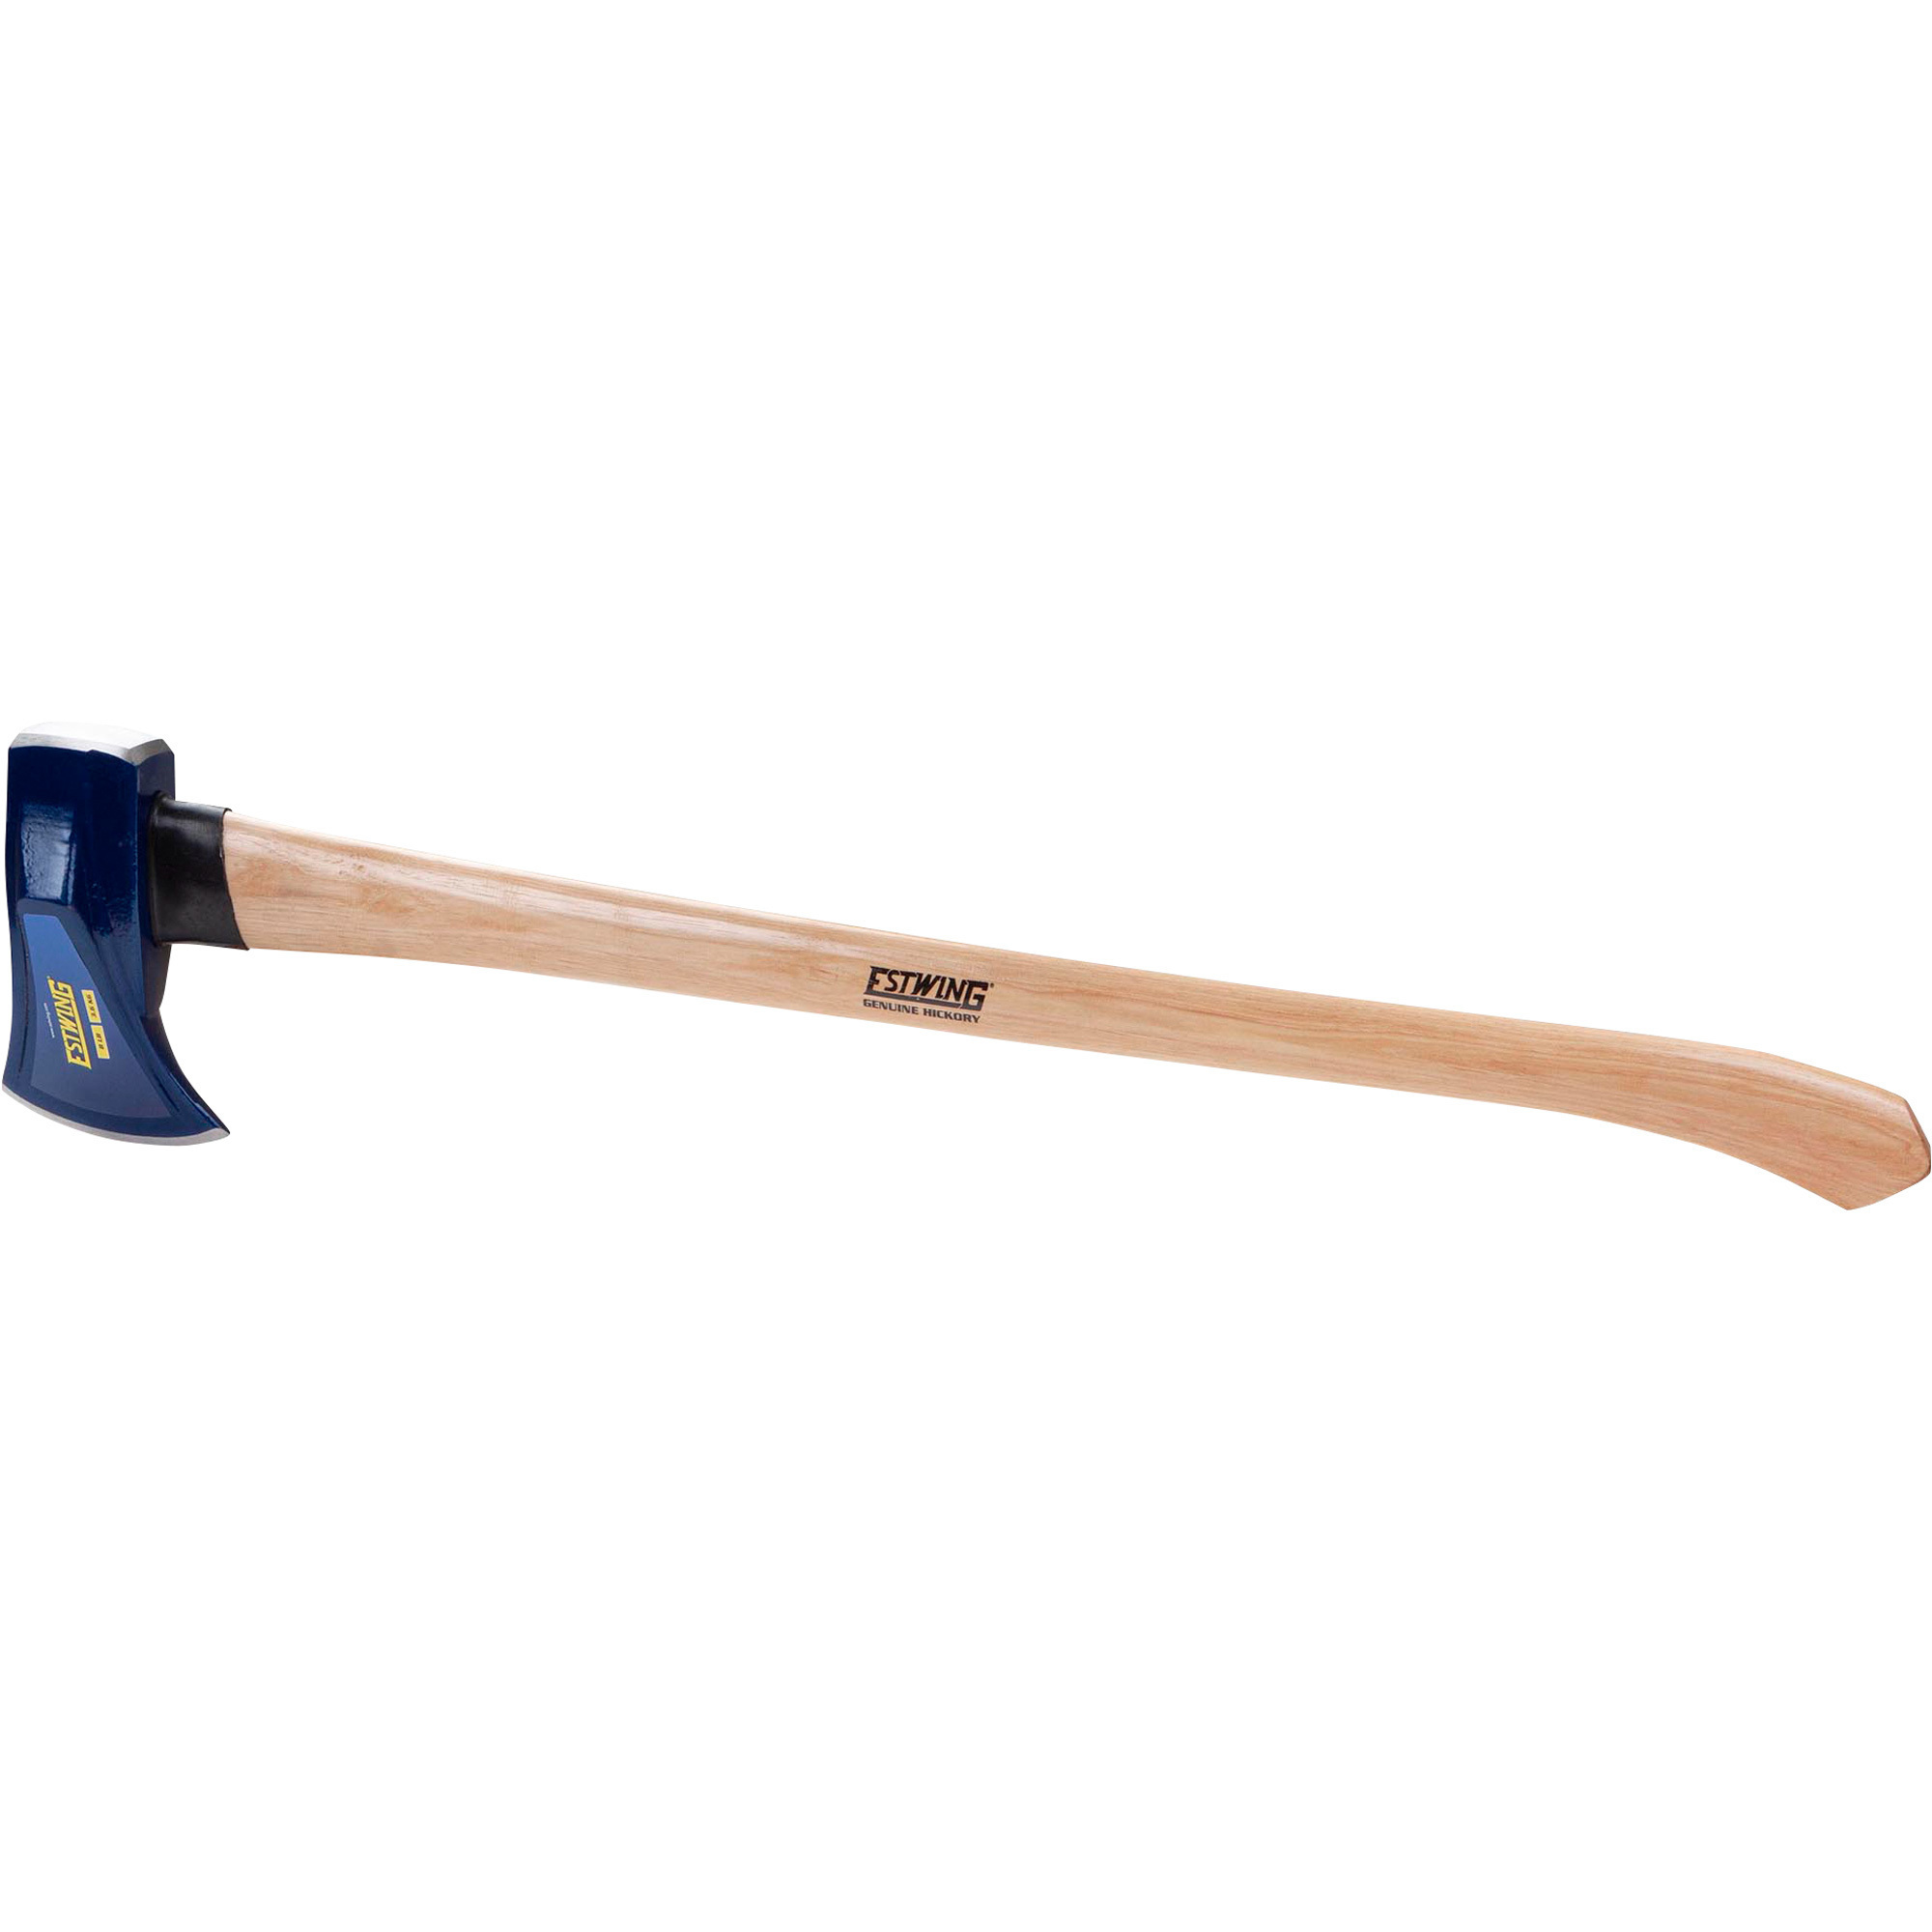 Estwing Splitting Maul with Hickory Wood Handle, 8-Lb., 36Inch, Model EML-836W